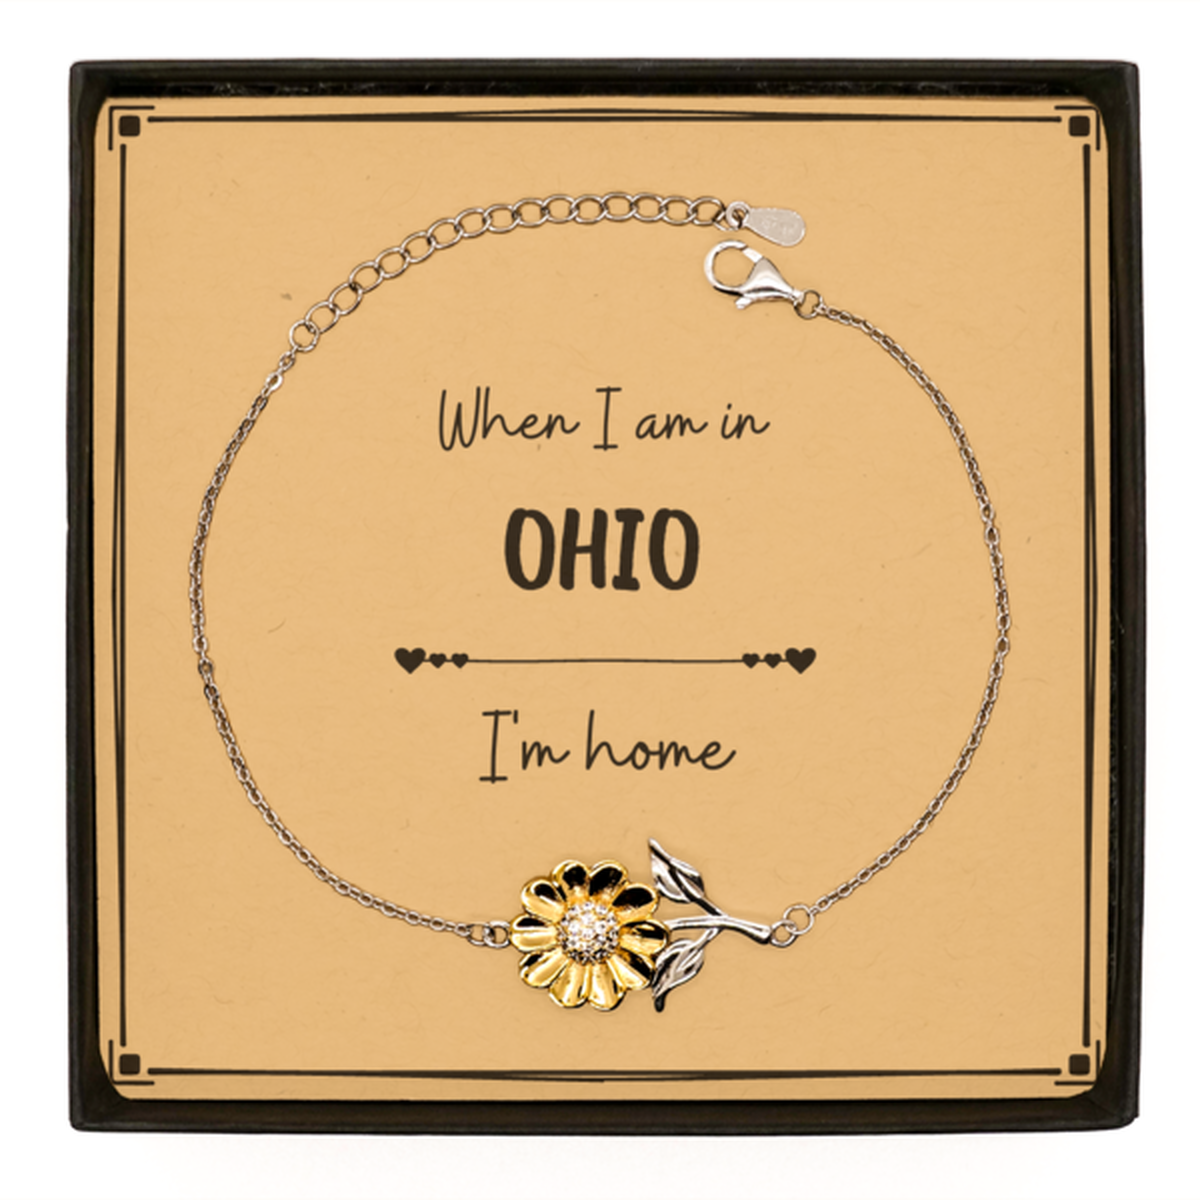 When I am in Ohio I'm home Sunflower Bracelet, Message Card Gifts For Ohio, State Ohio Birthday Gifts for Friends Coworker